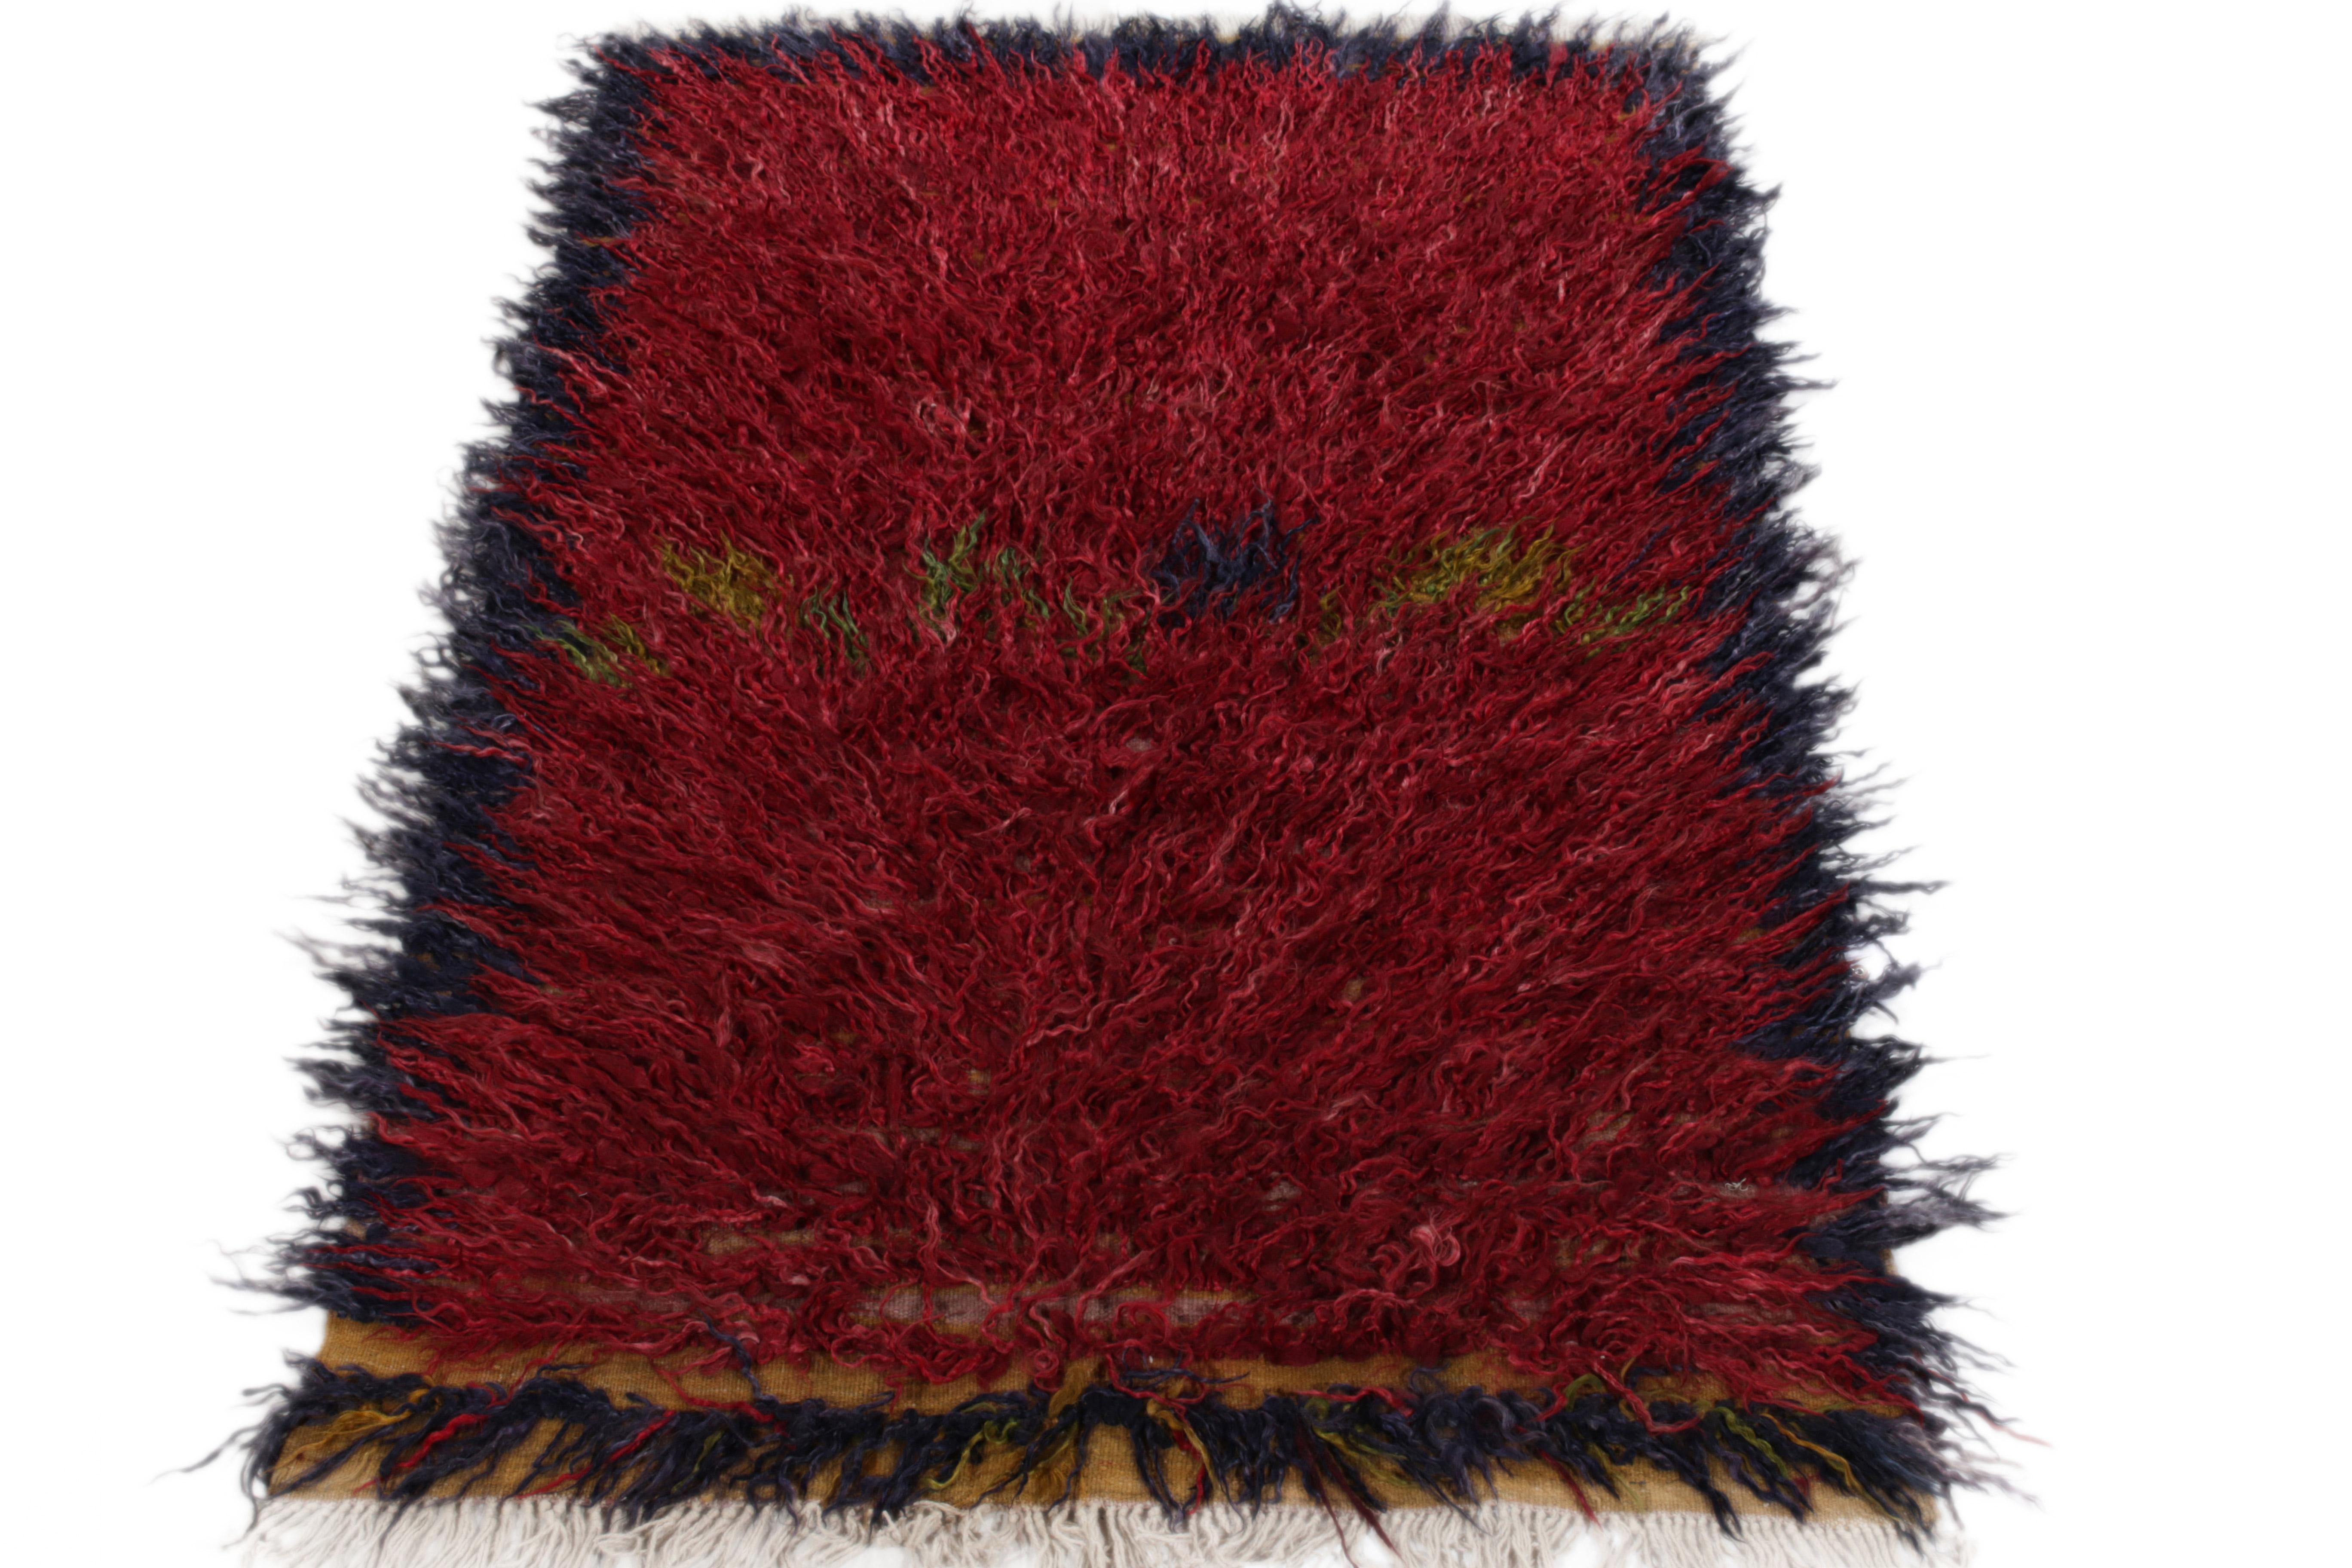 Hand-knotted in wool, this 4X7 Tulu rug from Turkey circa 1950-1960 joins Rug & Kilim’s Antique & Vintage collection in its coveted textural allure. Featuring a healthy high pile, the rug enjoys a bold colorway of richred, with a navy blue border,